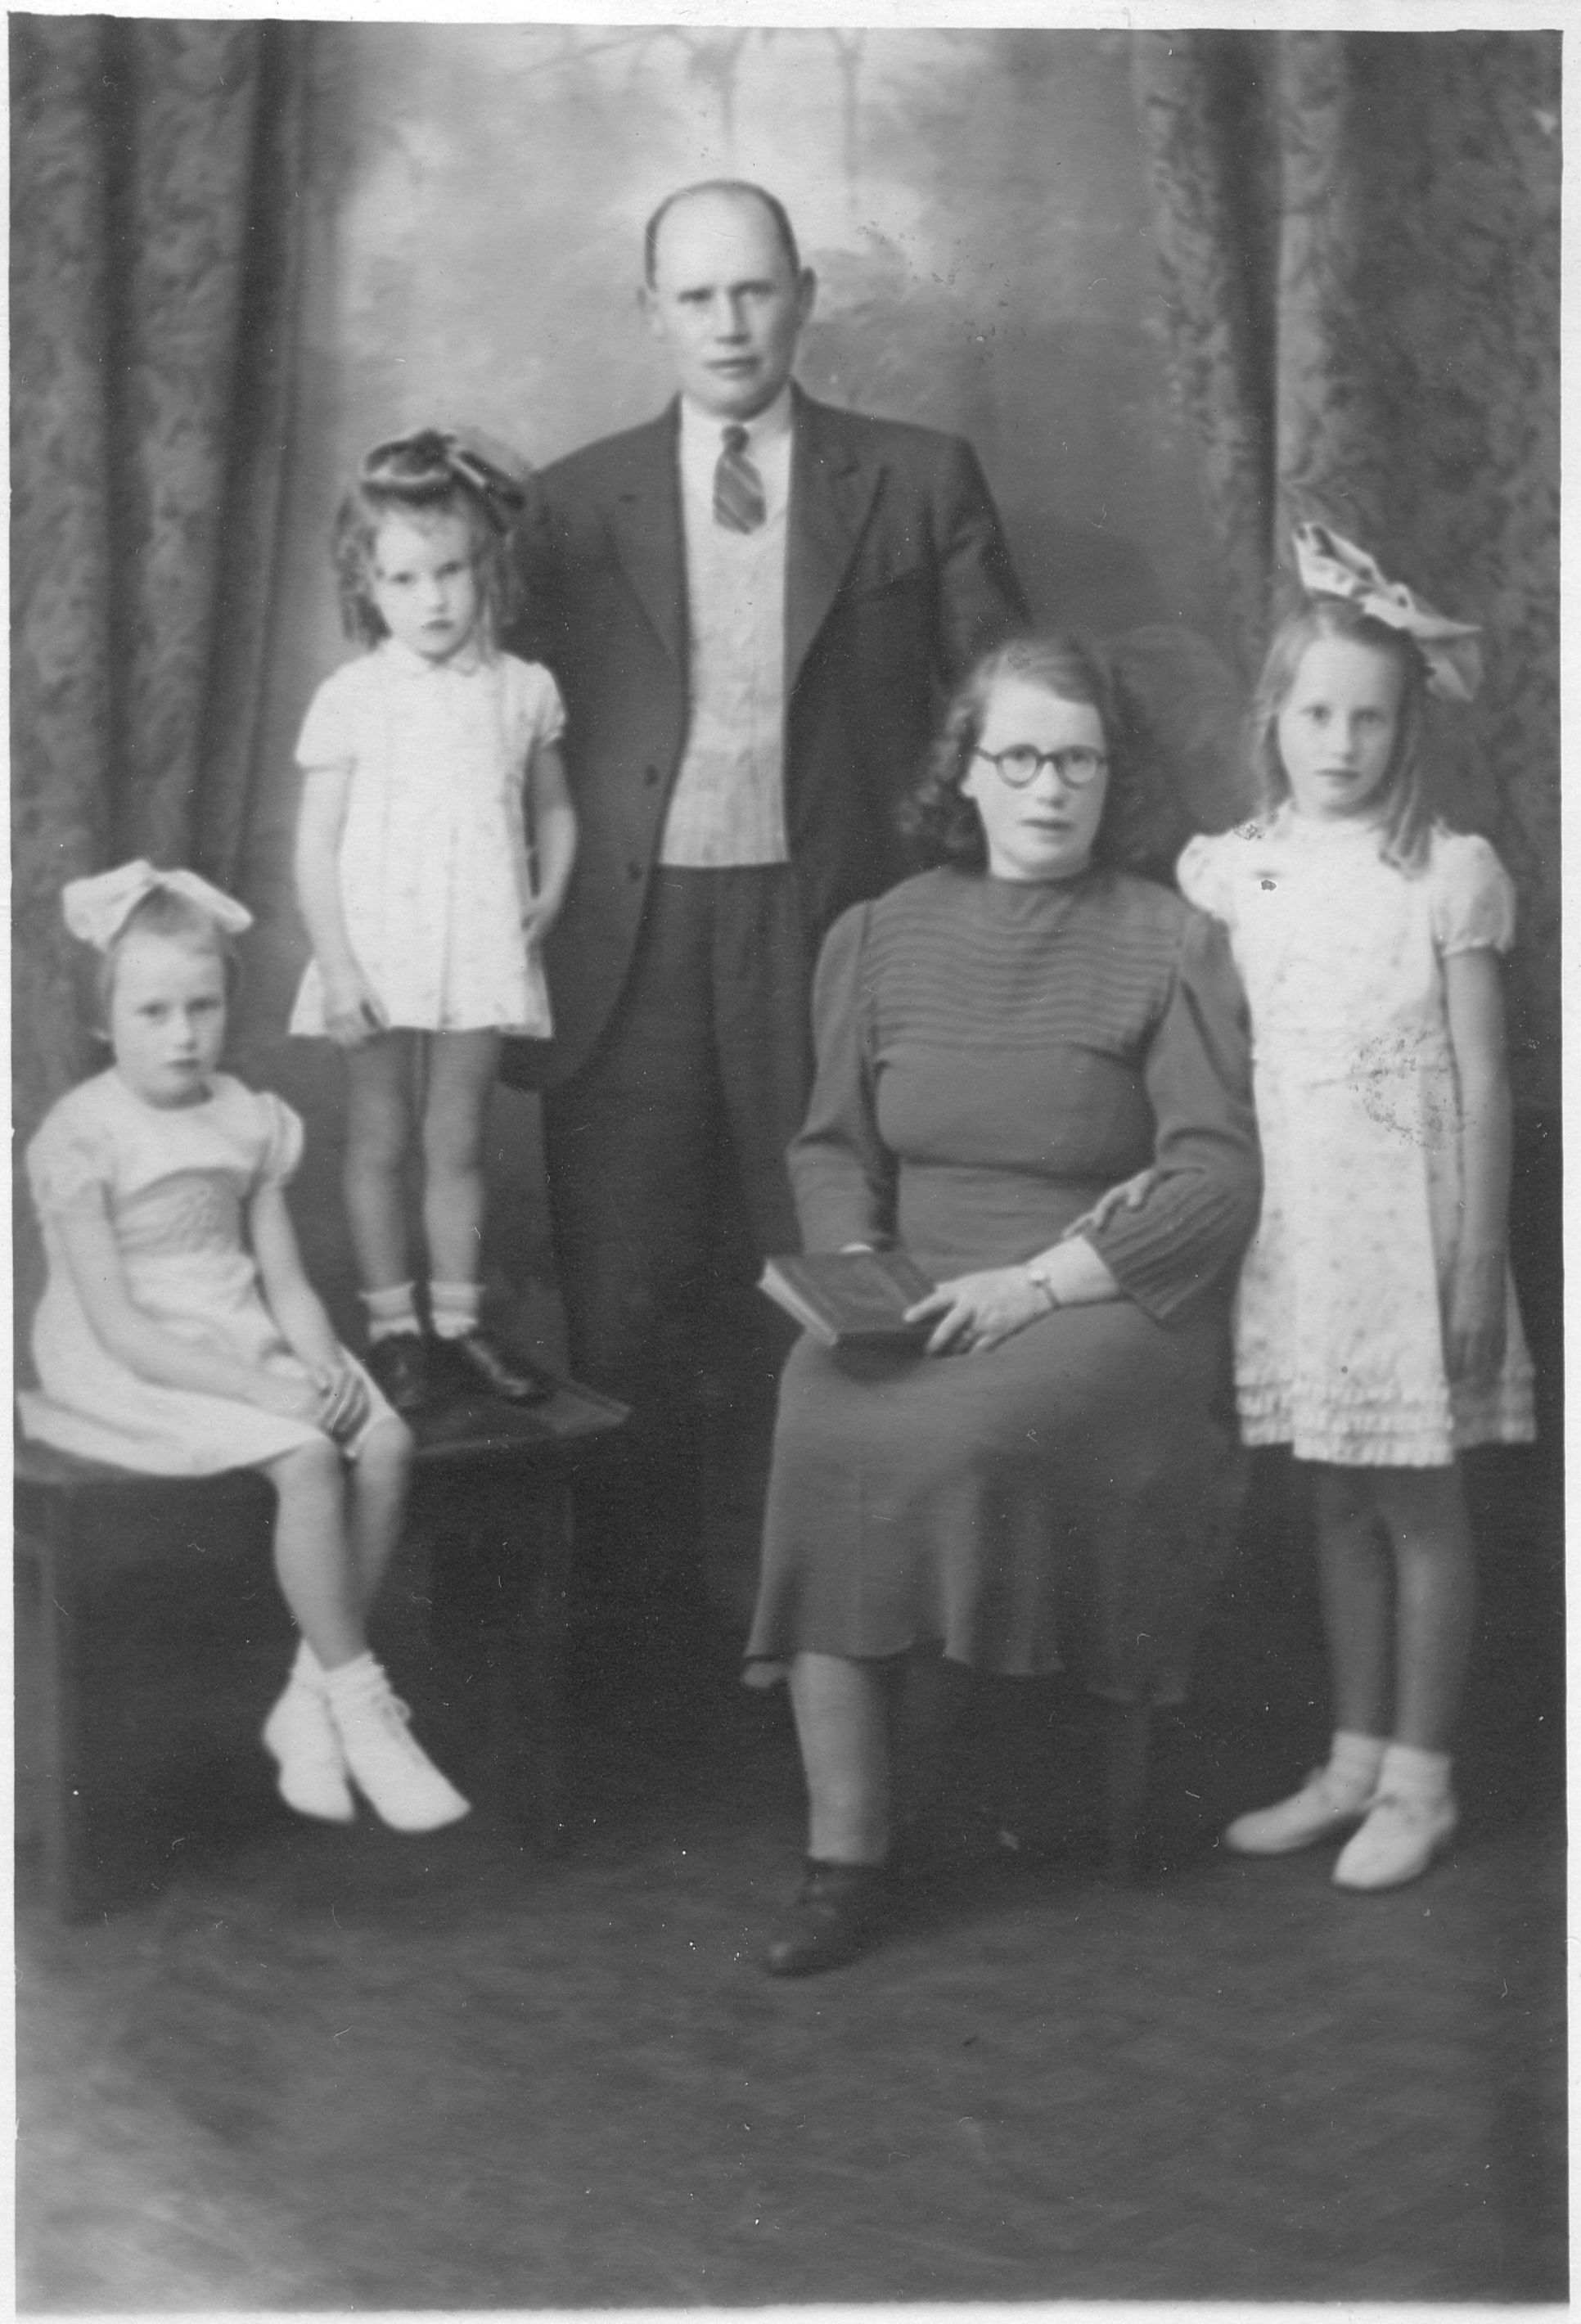 Barker Family Group about 1940